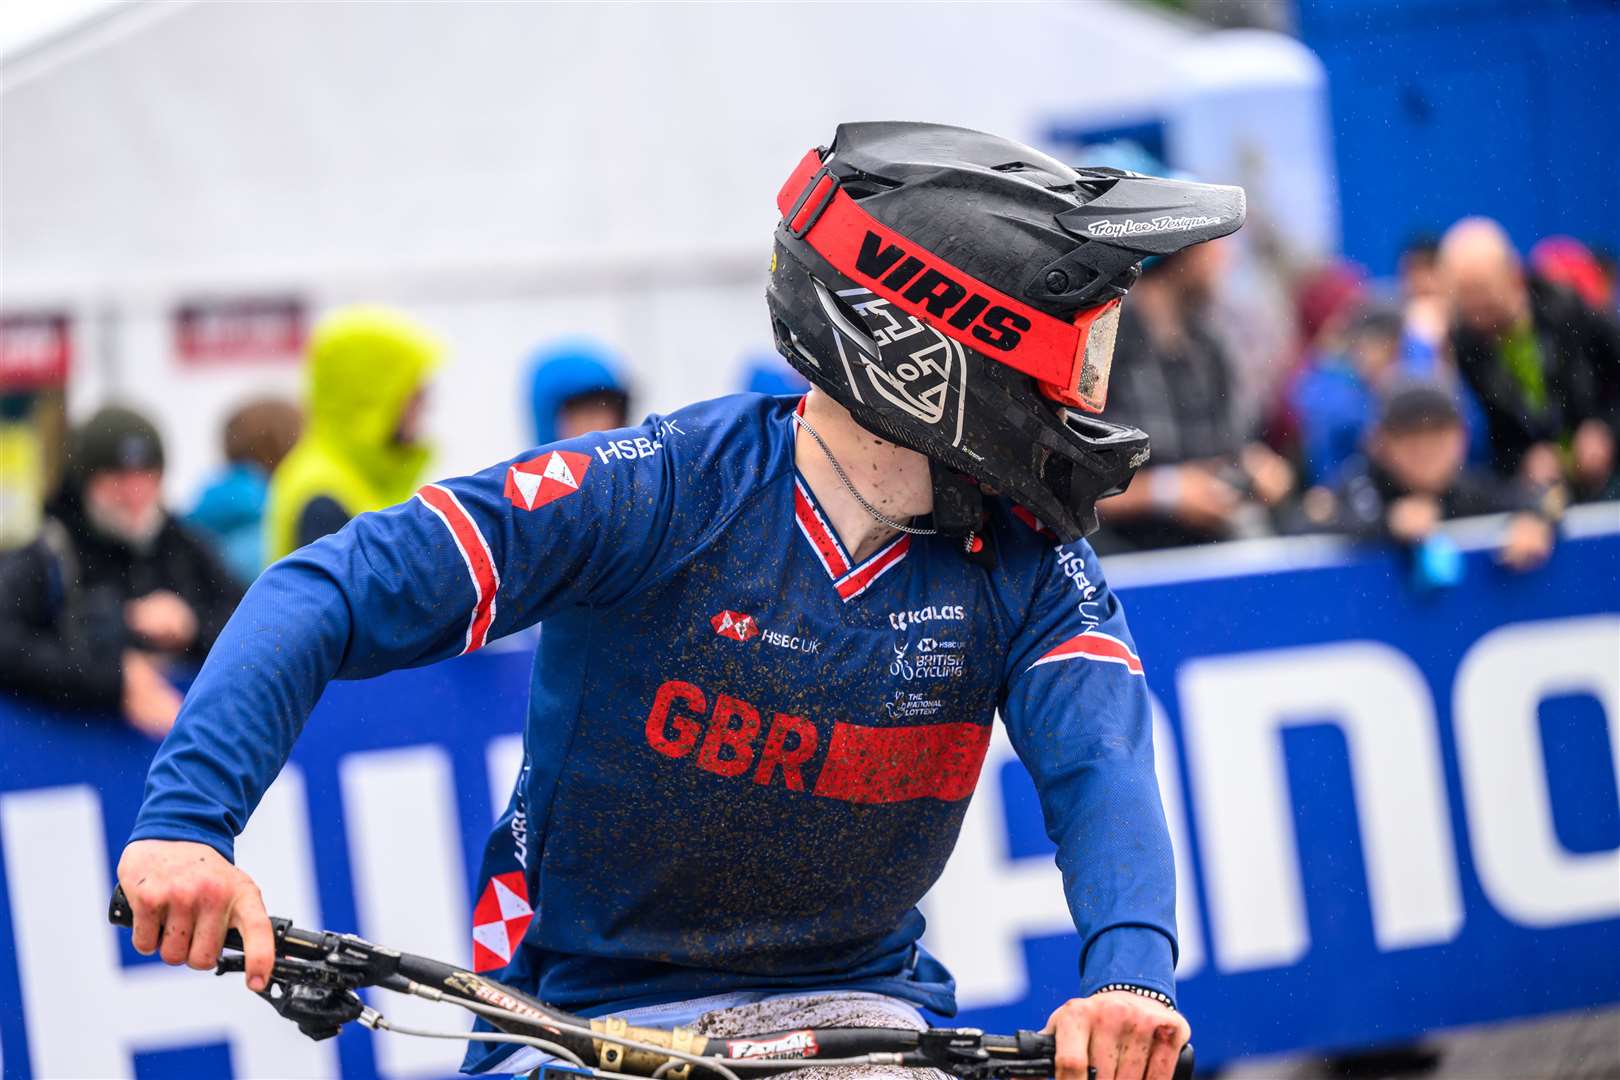 Lewis Duncan (16) from Brora competed in the UCI Downhill World Cup in Fort William on Saturday.